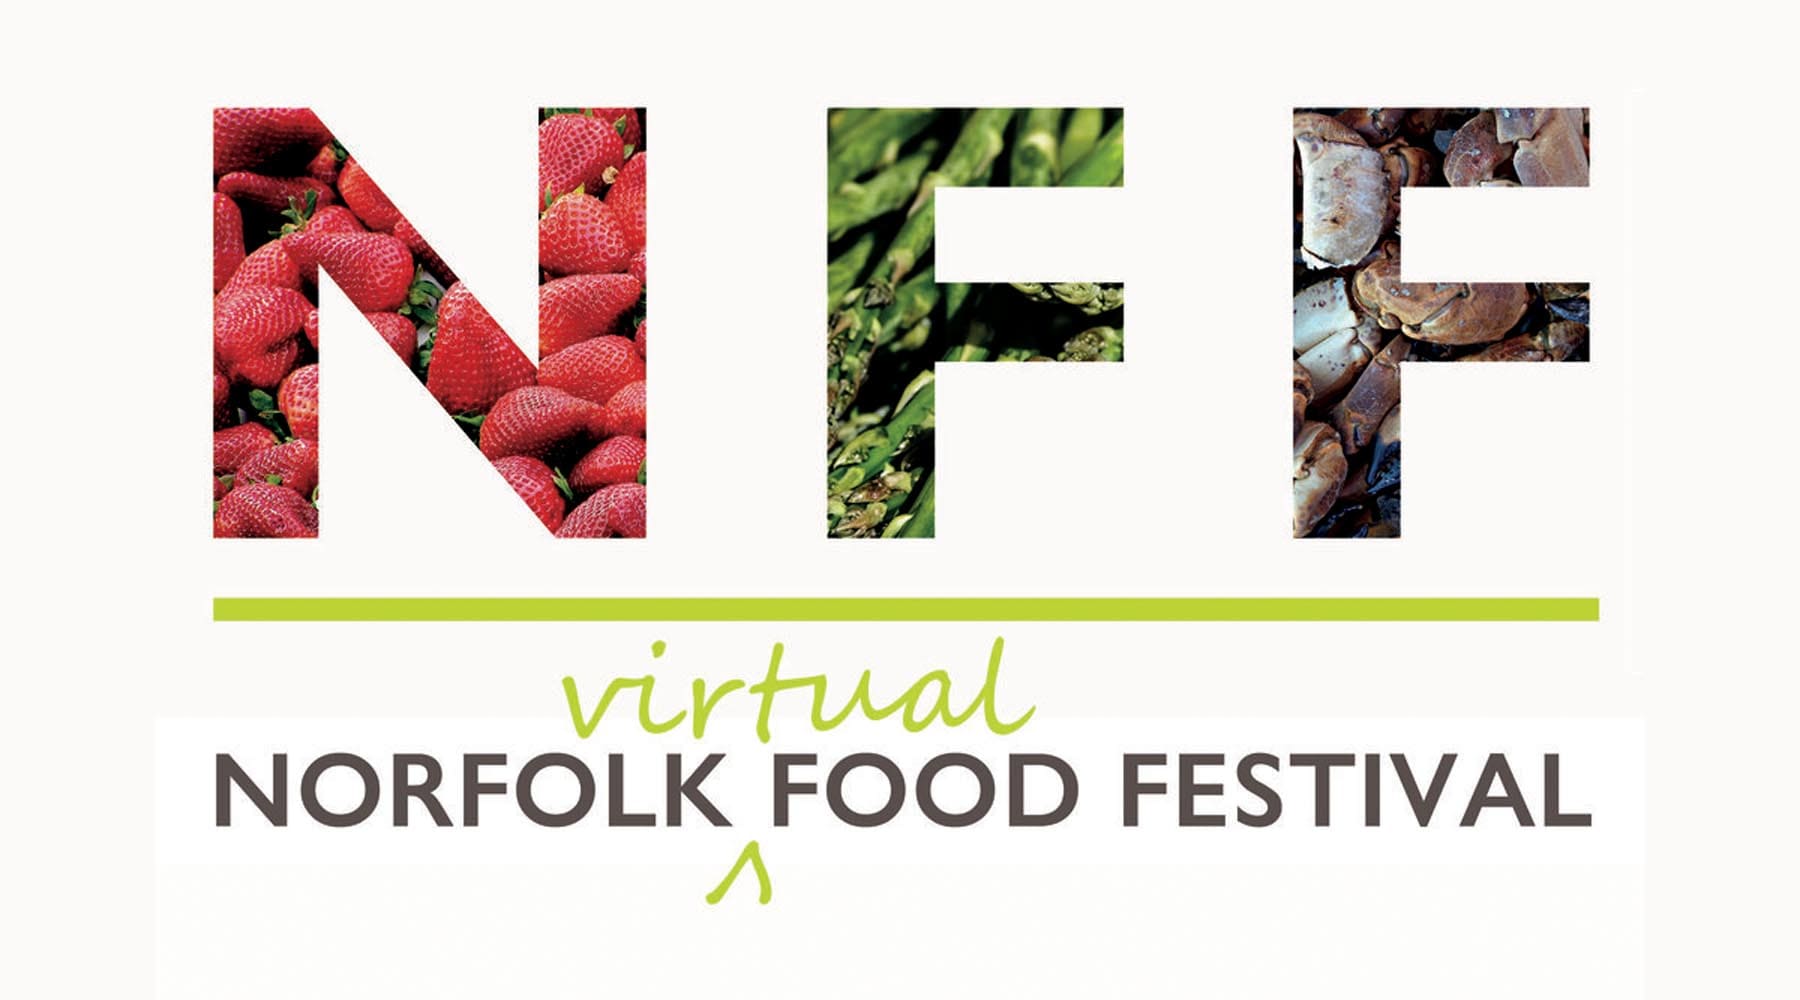 The first Norfolk ‘Virtual' Food Festival